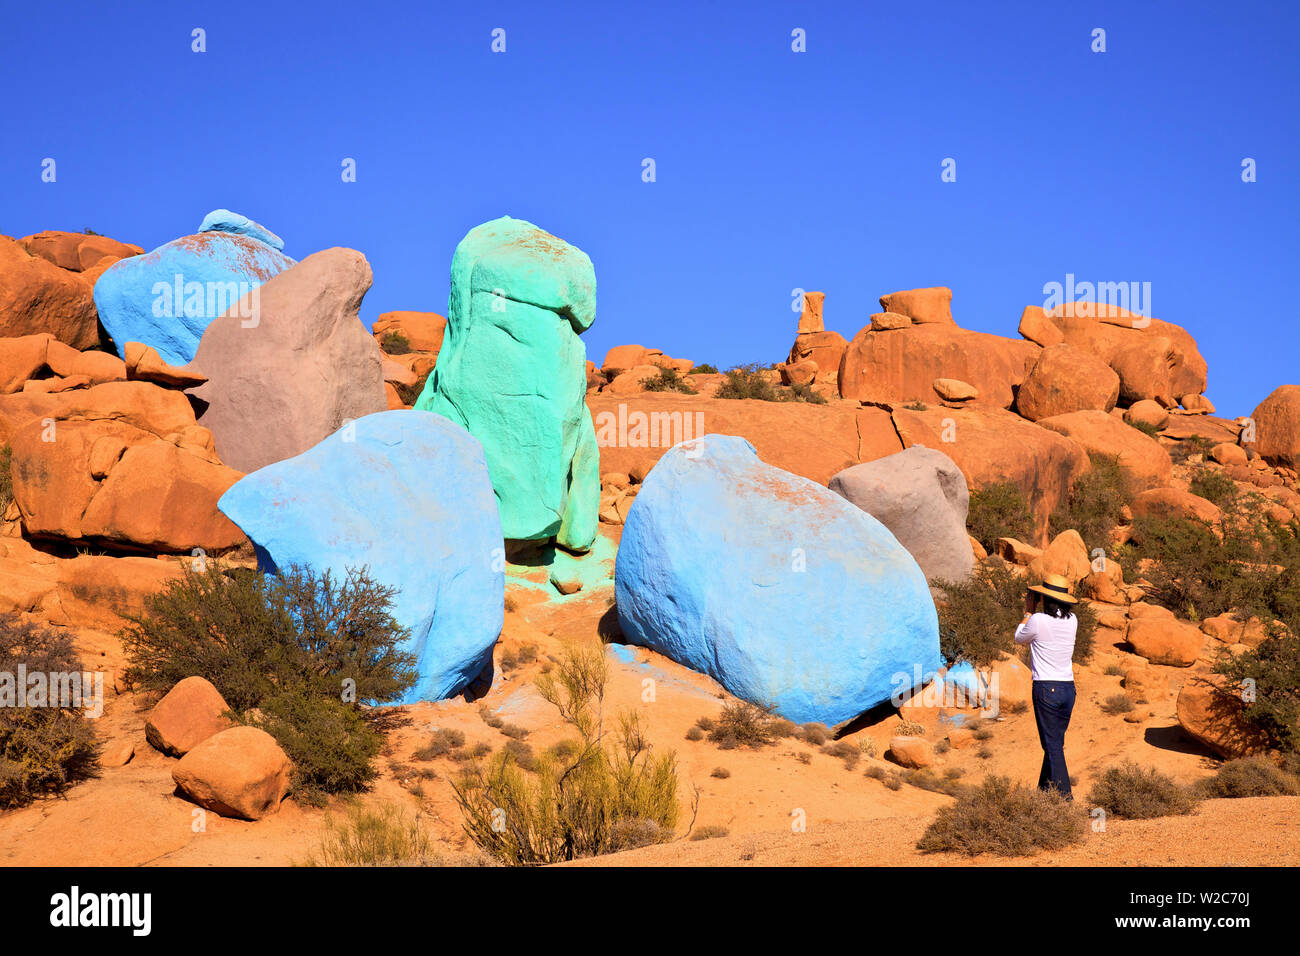 Tourist Taking Photographs Of Painted Rocks By Belgian Artist Jean Verame, Tafraoute, Morocco, North Africa (MR) Stock Photo